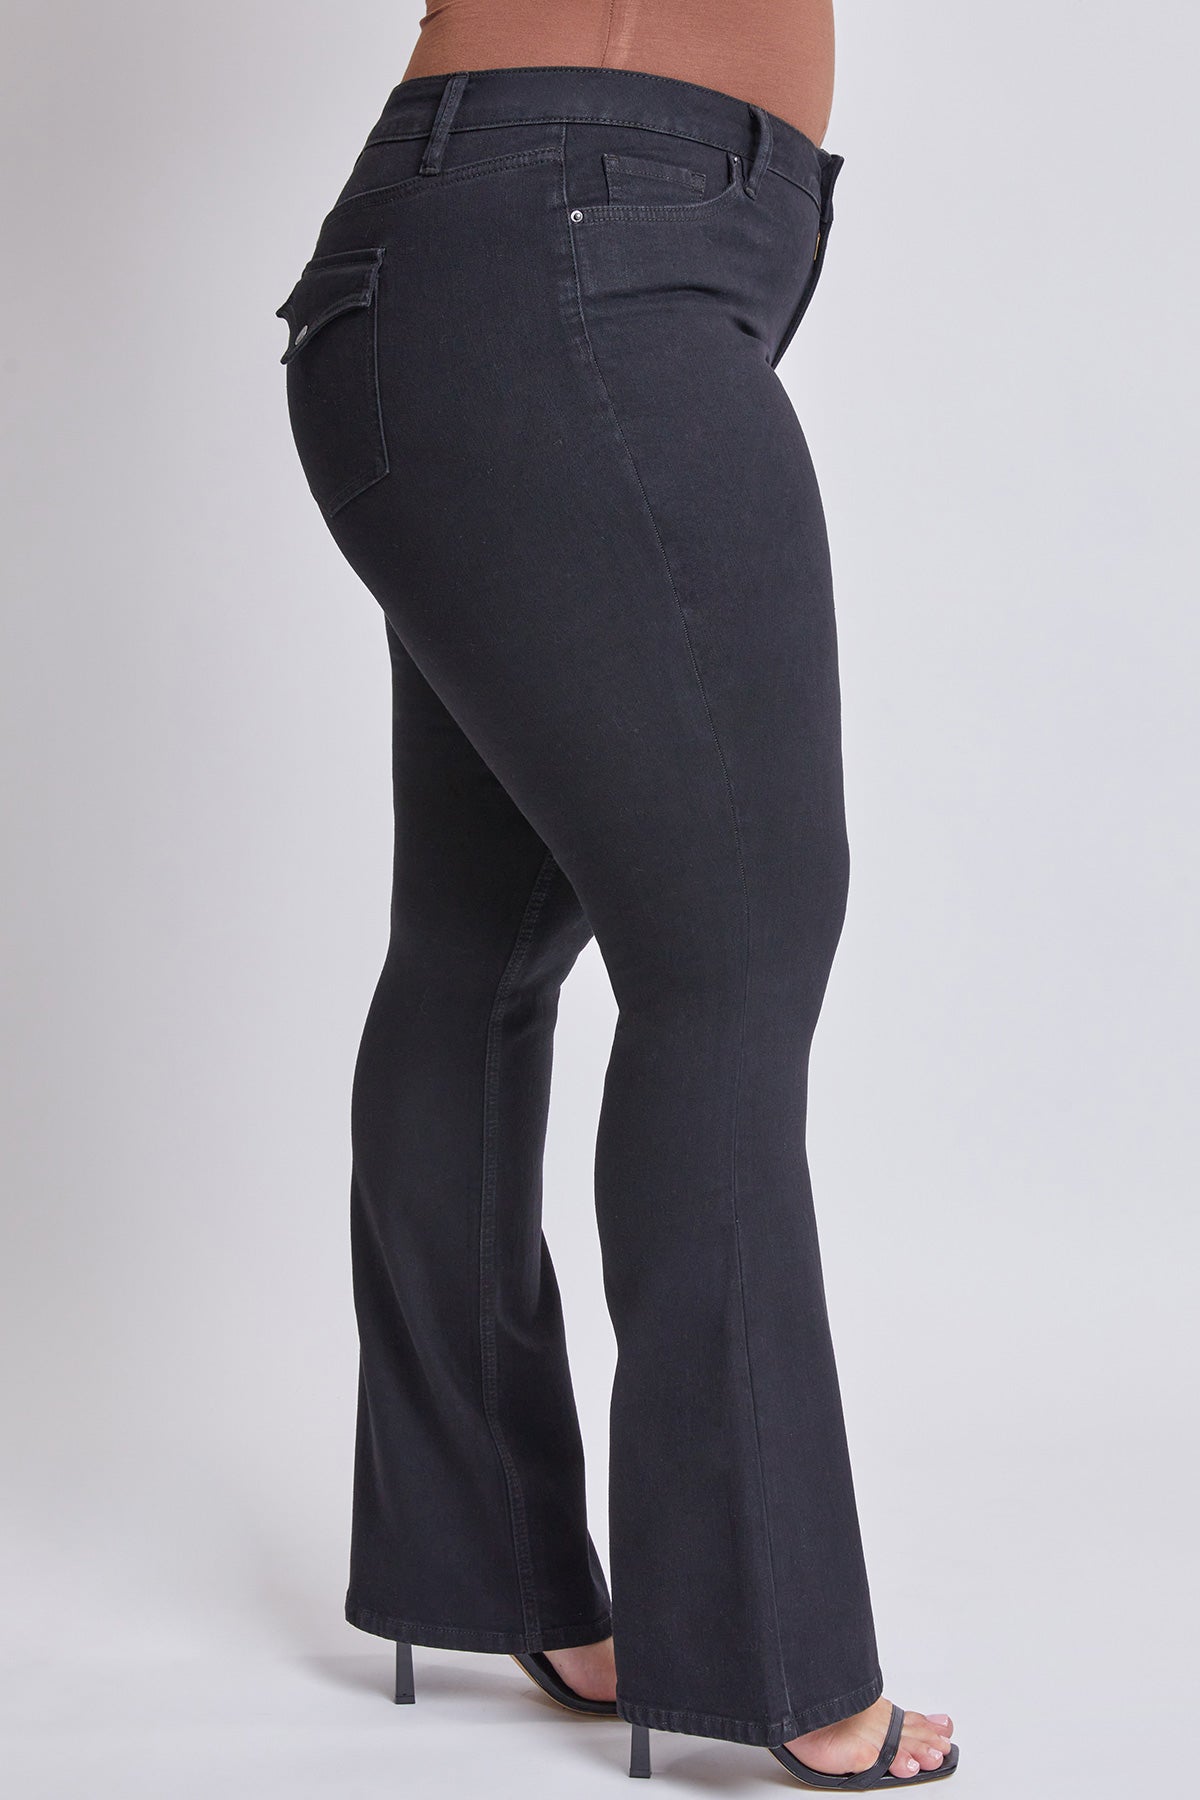 Missy Plus Size Sustainable Mid Rise Boot Cut Jeans